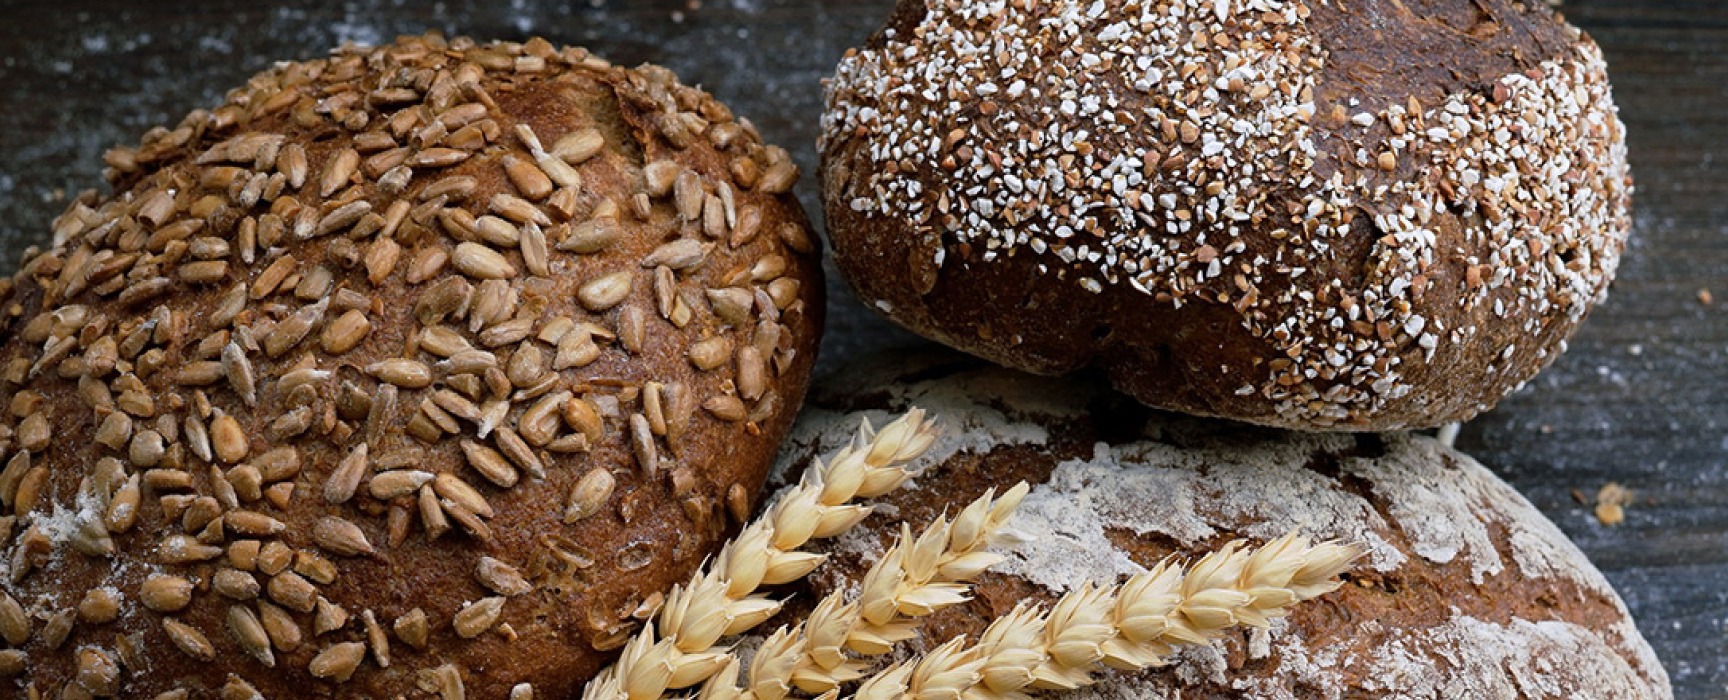 Closeup of various bread and grains with seeds